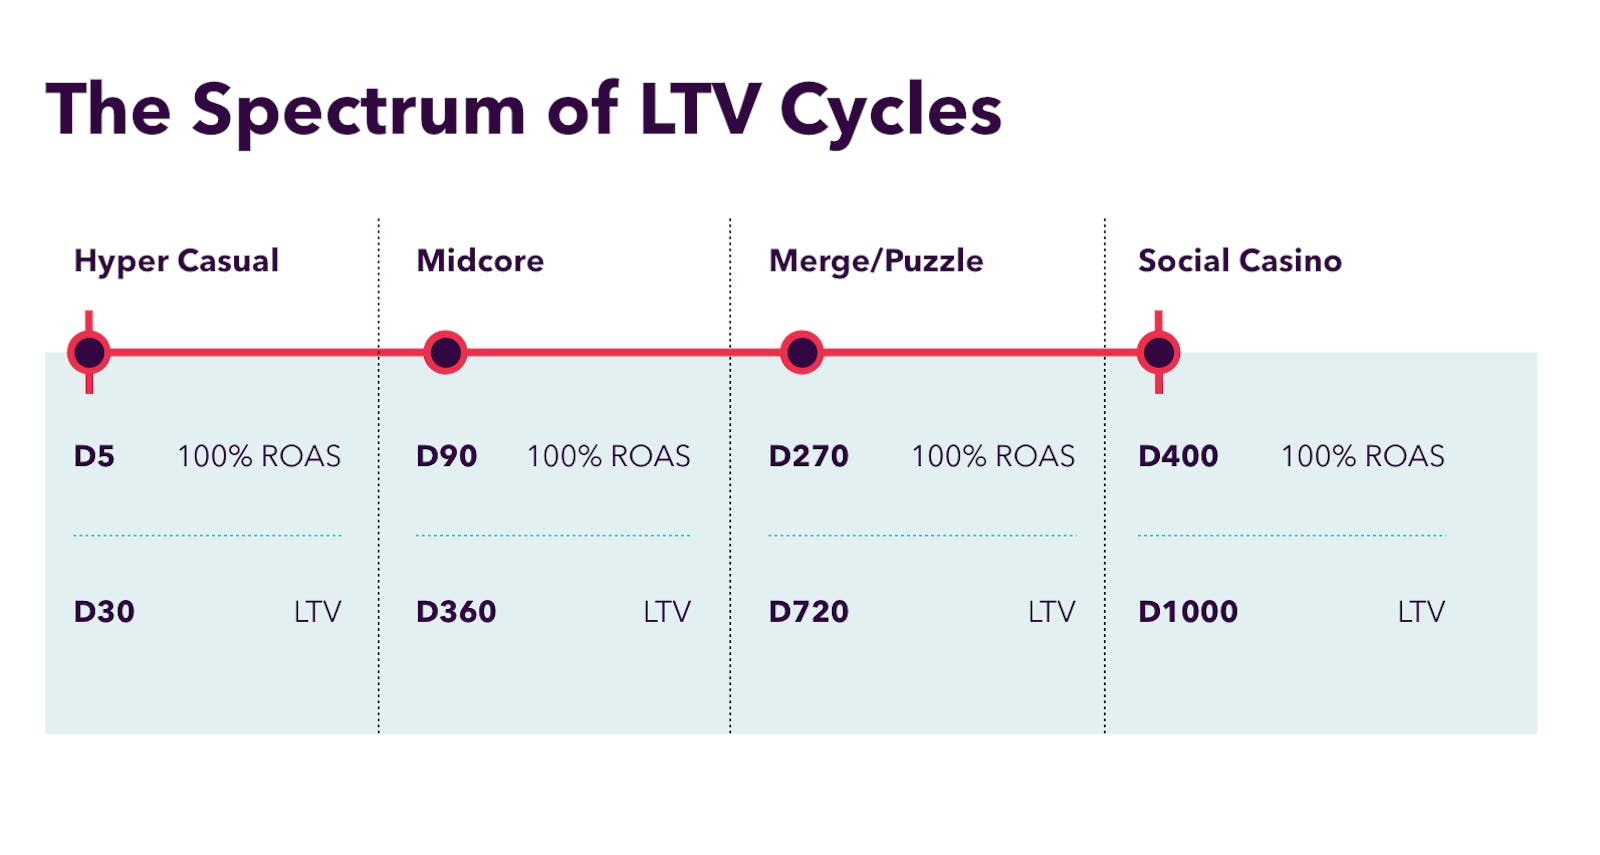 The Spectrum of LTV Cycles